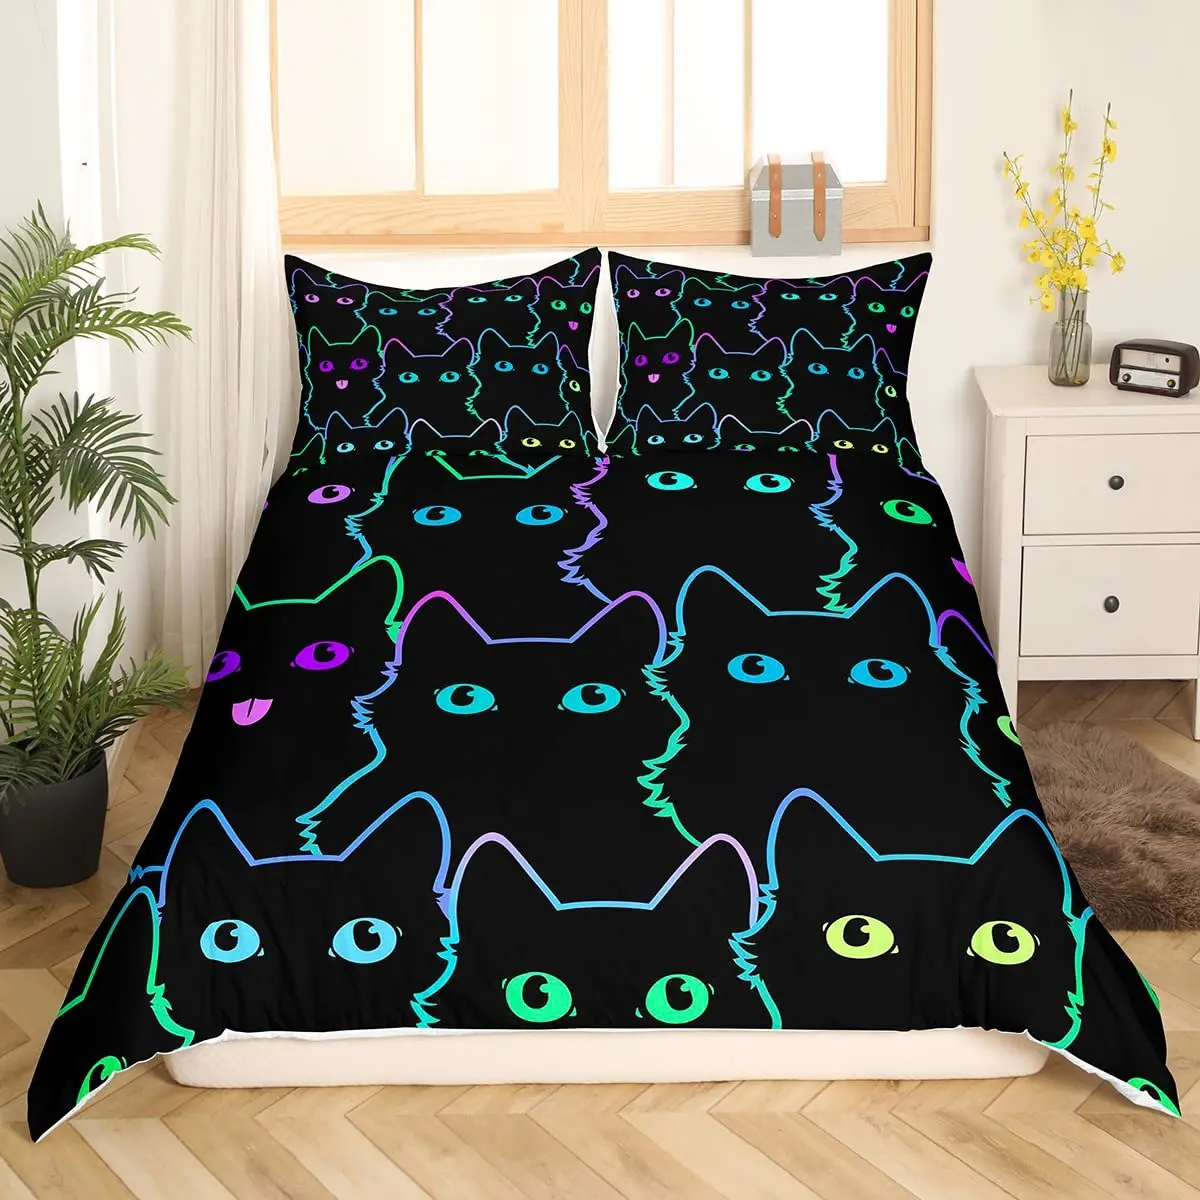 For Kids Teens Adults Animal 2/3pcs Soft Quilt Cover